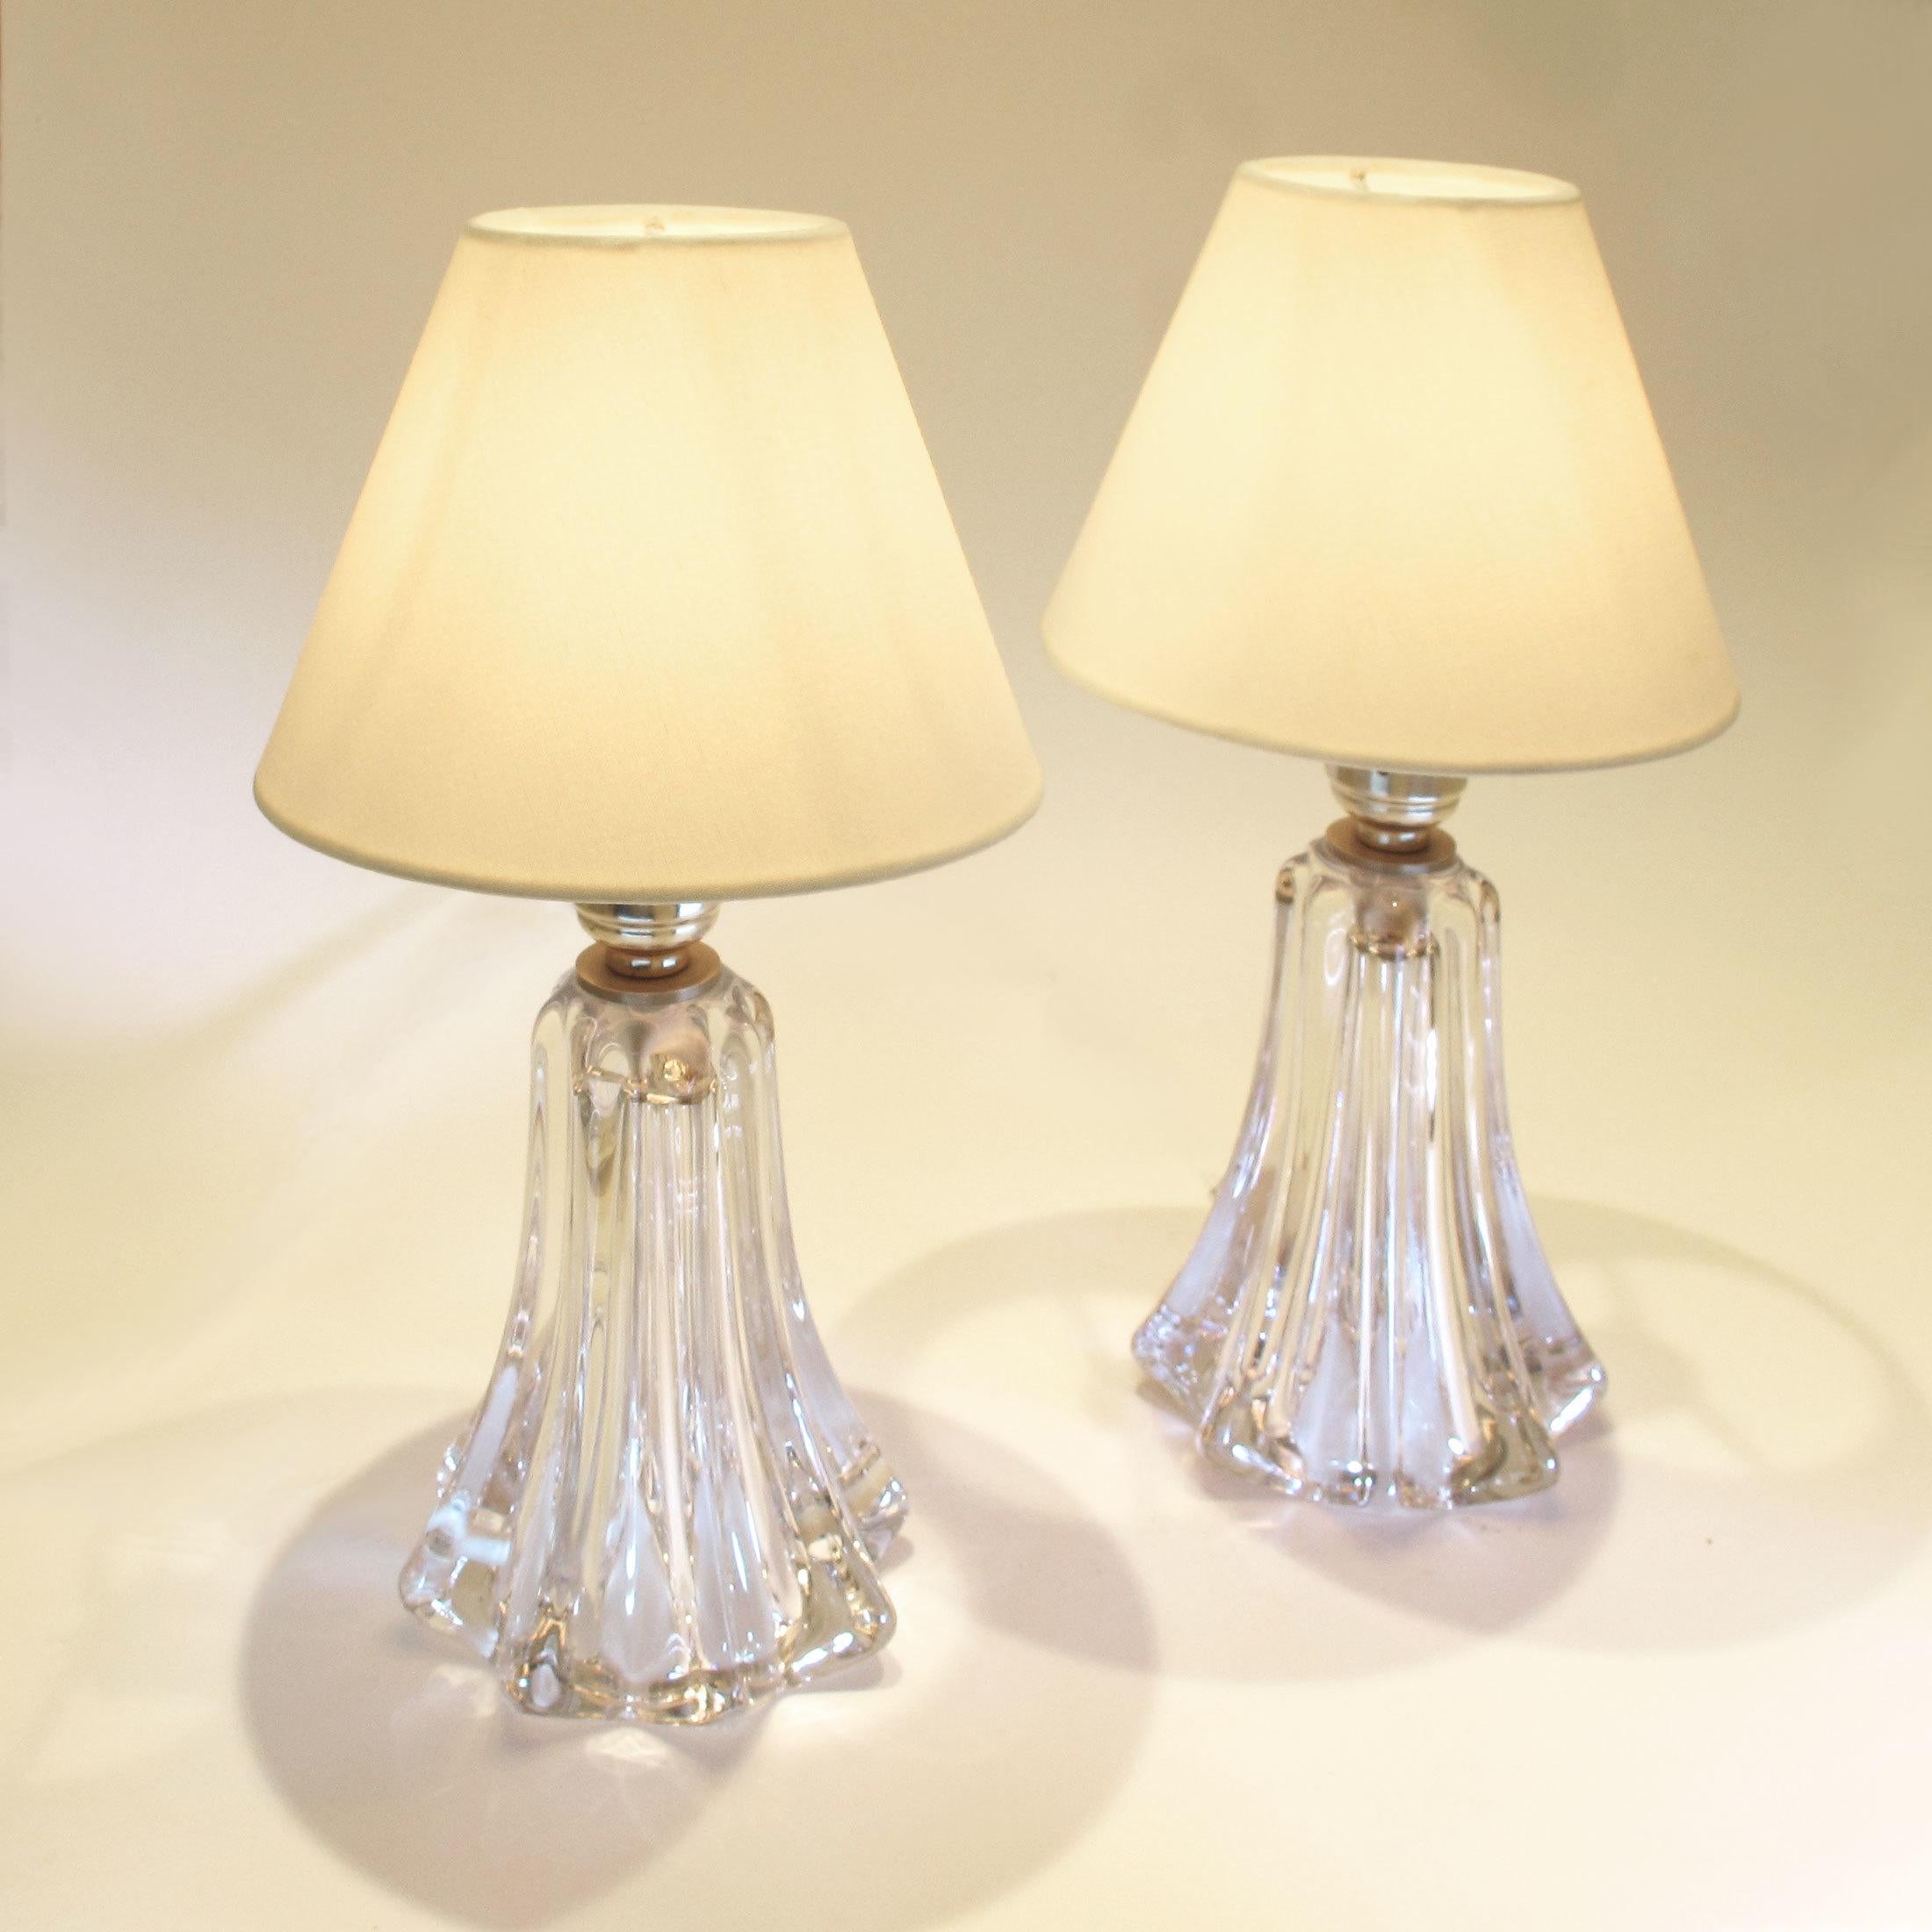 Pair of 1950s twisted crystal table lamps by the renowned Belgian crystal manufacturers.

Val Saint-Lambert was founded in 1826 by Francois Kemlin and quickly established itself, along with the British firm, Osler, as the best glass manufacturers